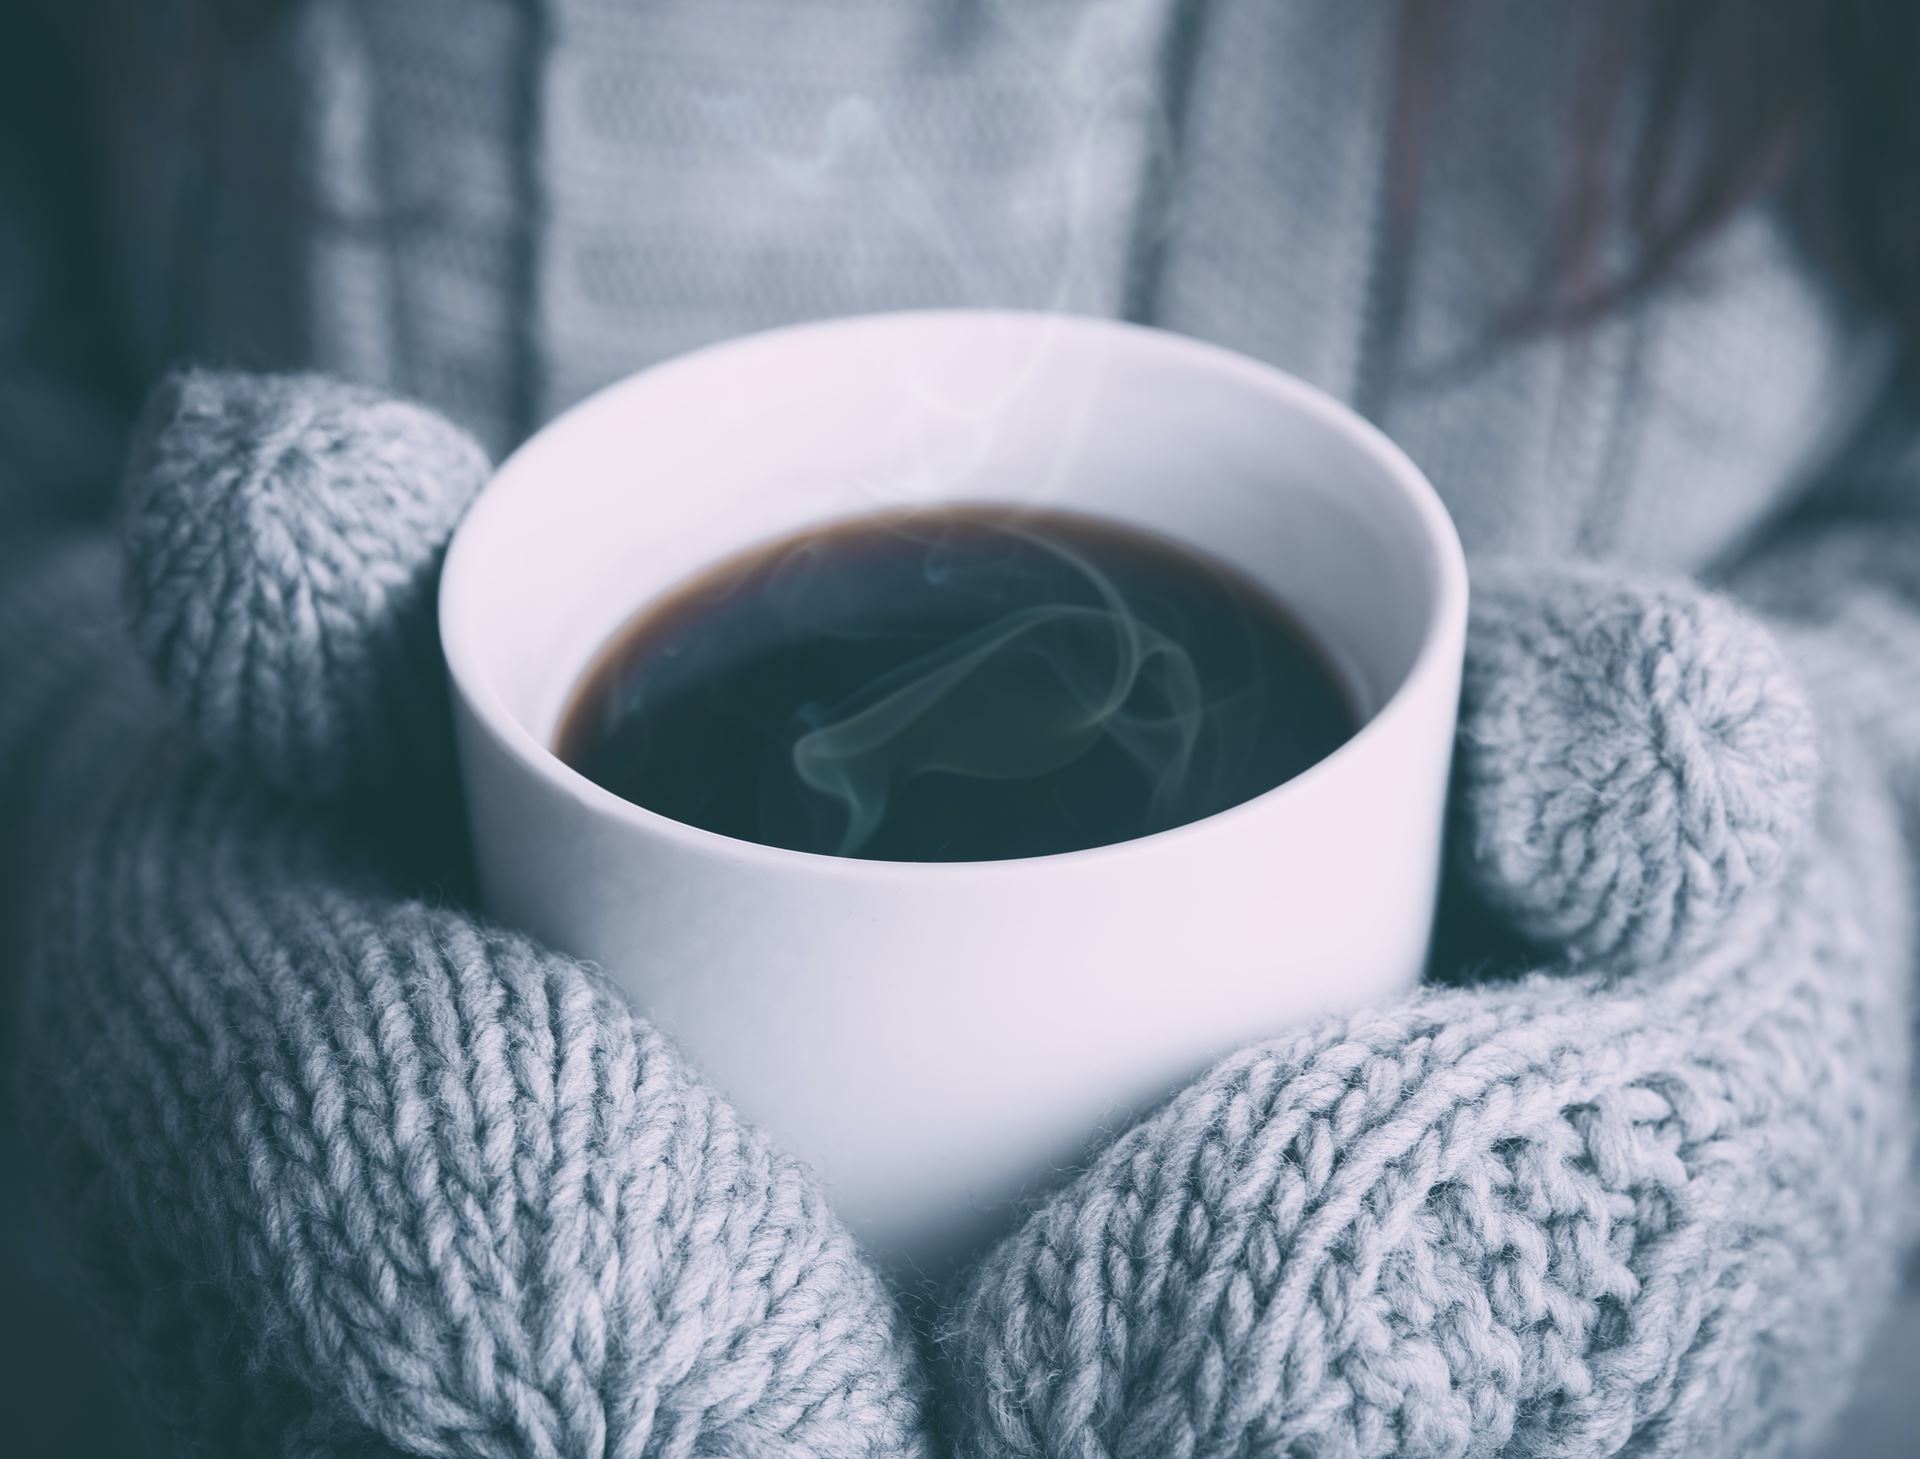 a person wearing wooly gloves holding a hot cup of coffee